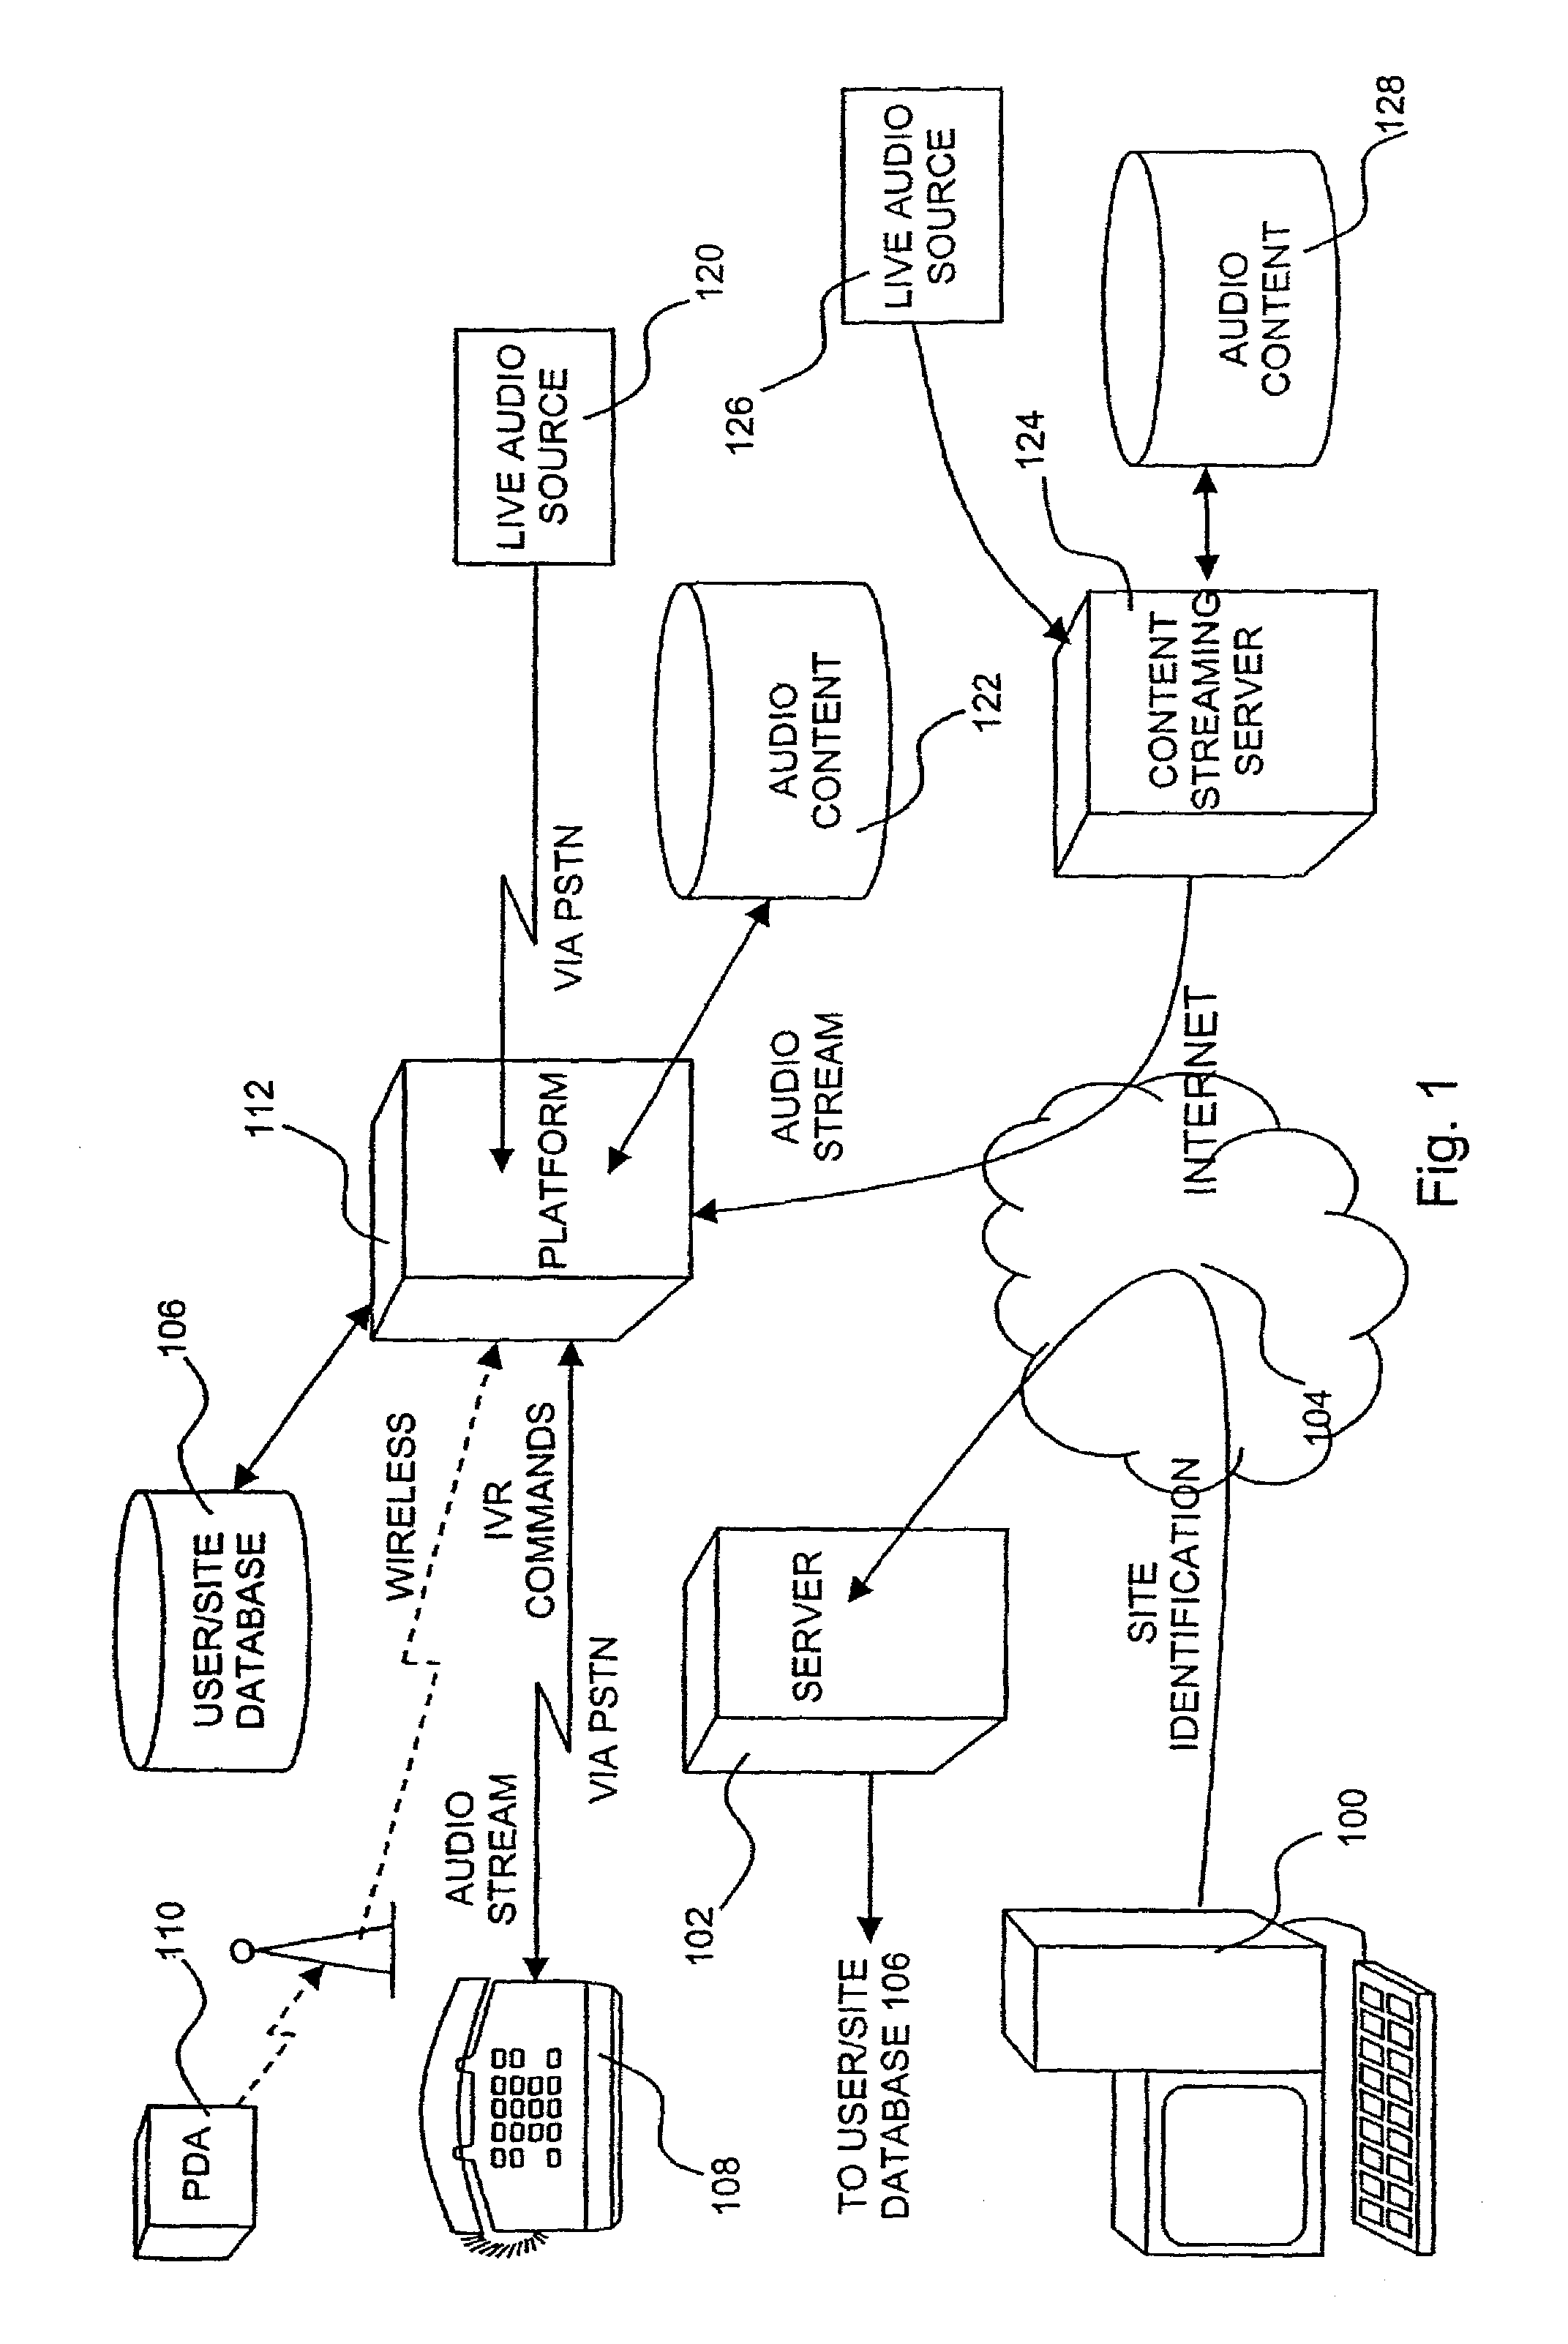 Telephone and wireless access to computer network-based audio